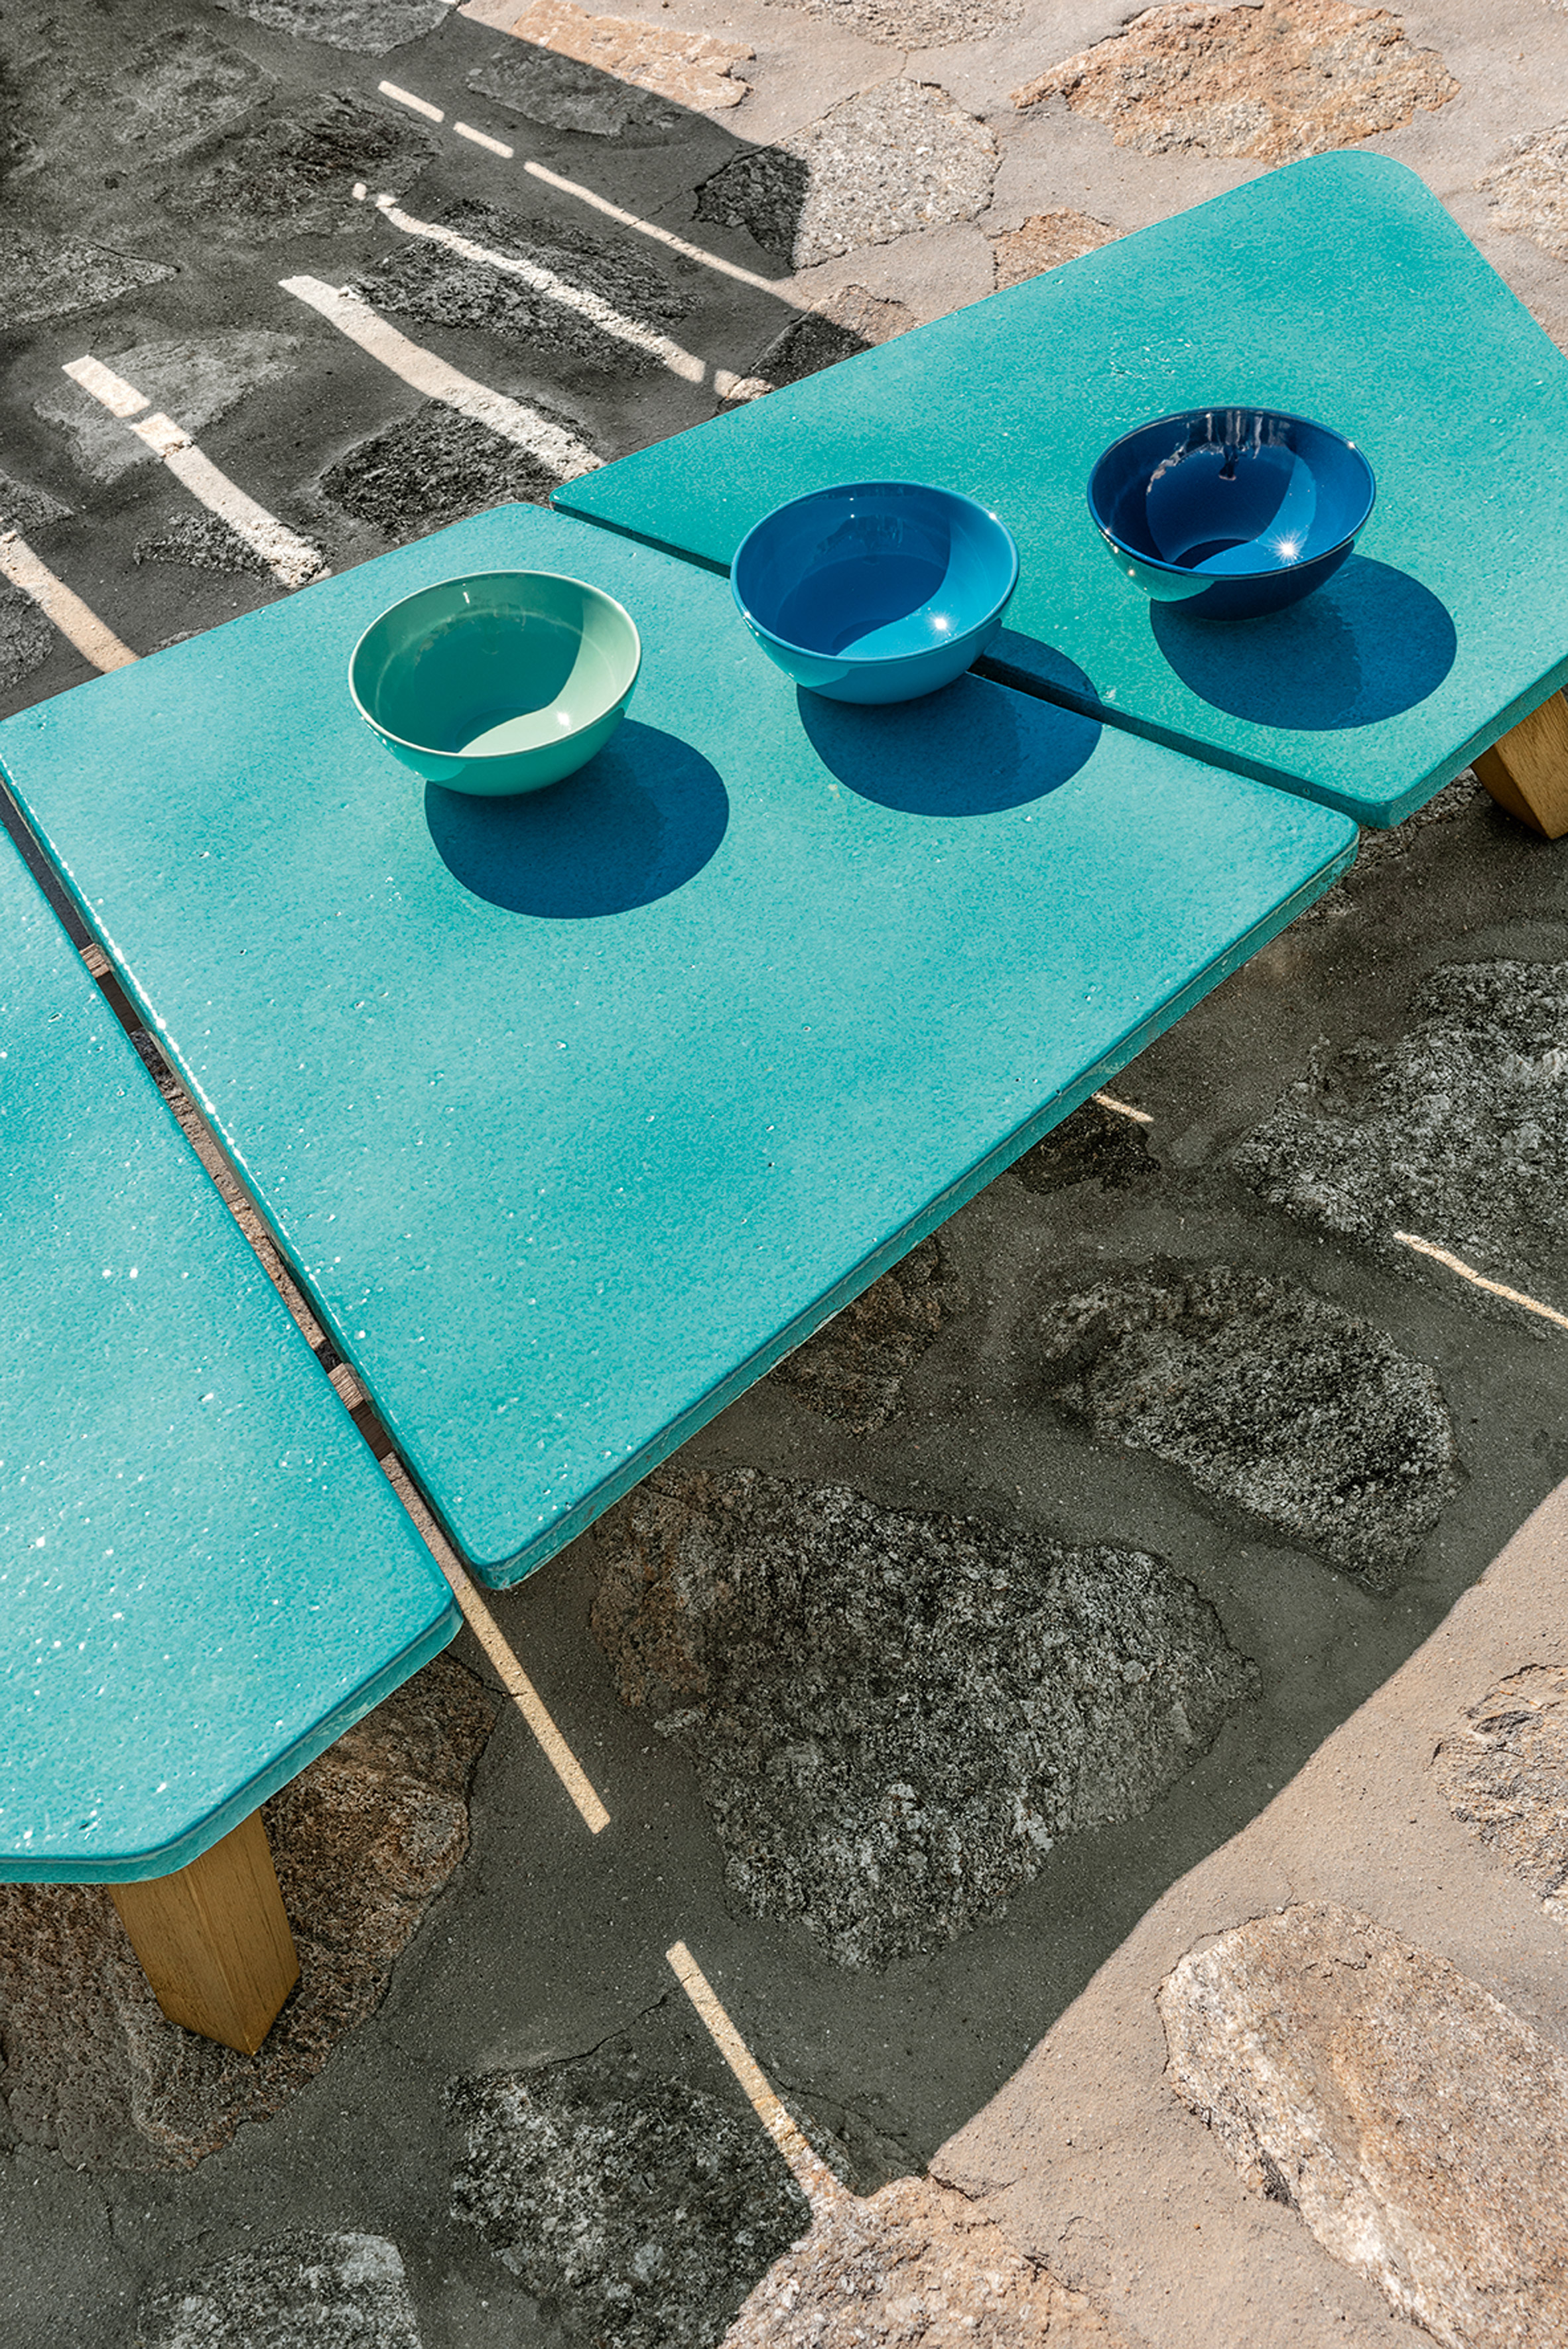 Rafael outdoor furniture by Paola Navone